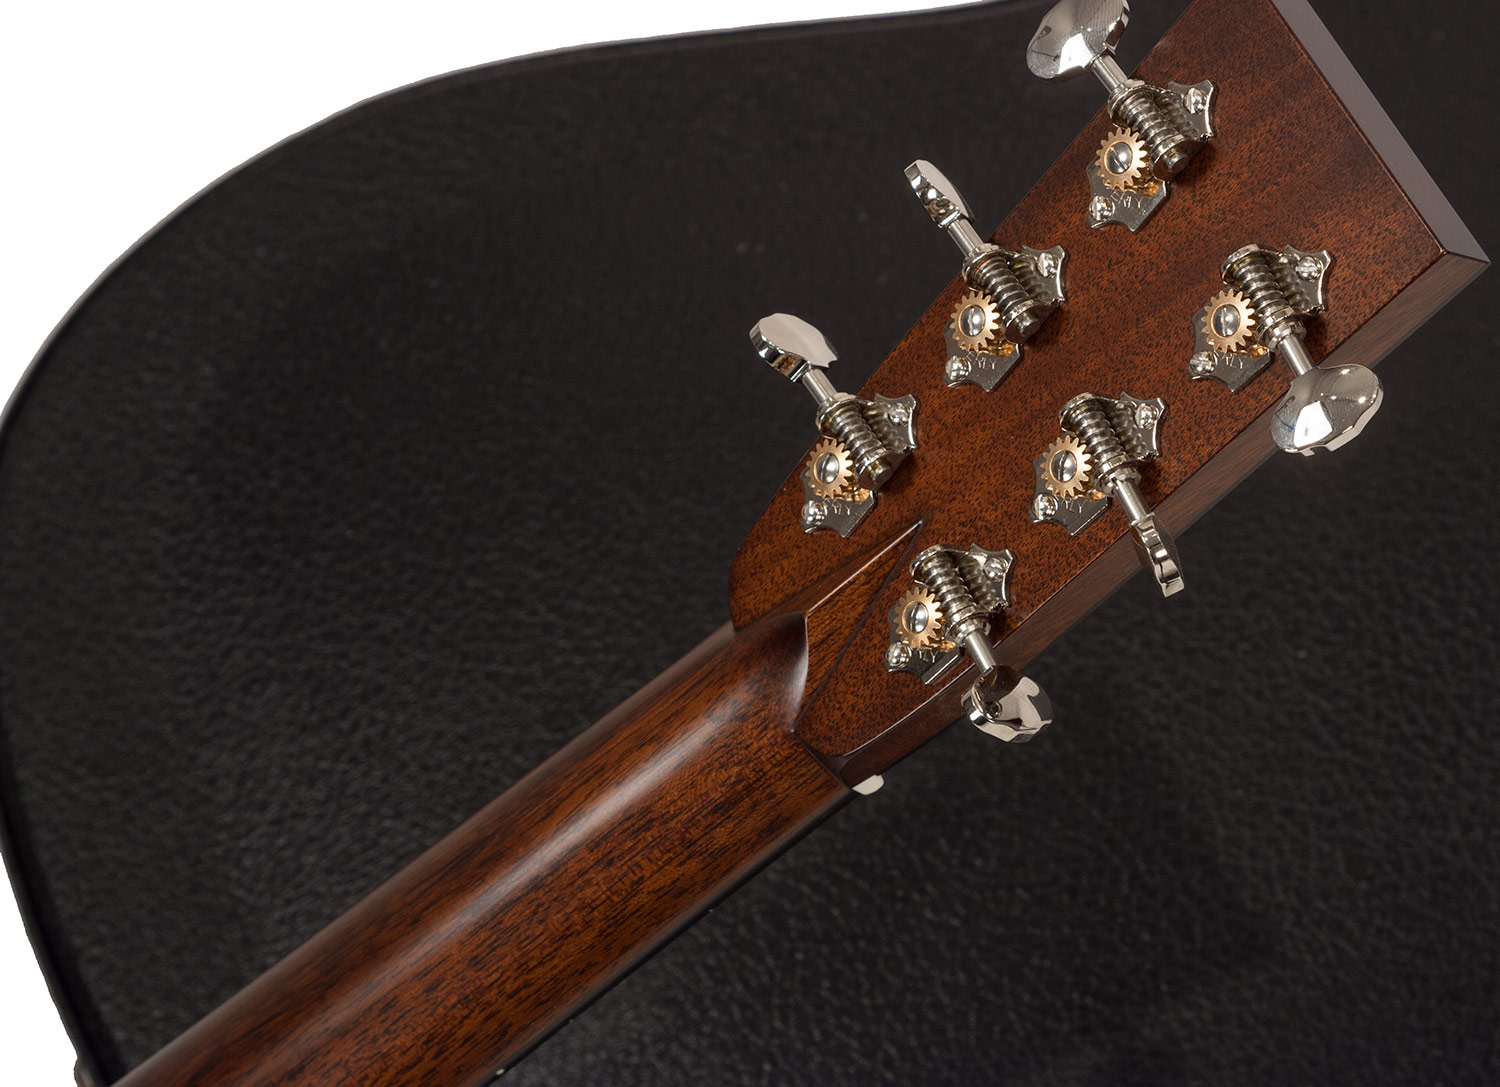 Collings D2h Custom Satin Neck, Torch Head #27113 - Natural - Westerngitarre & electro - Variation 7